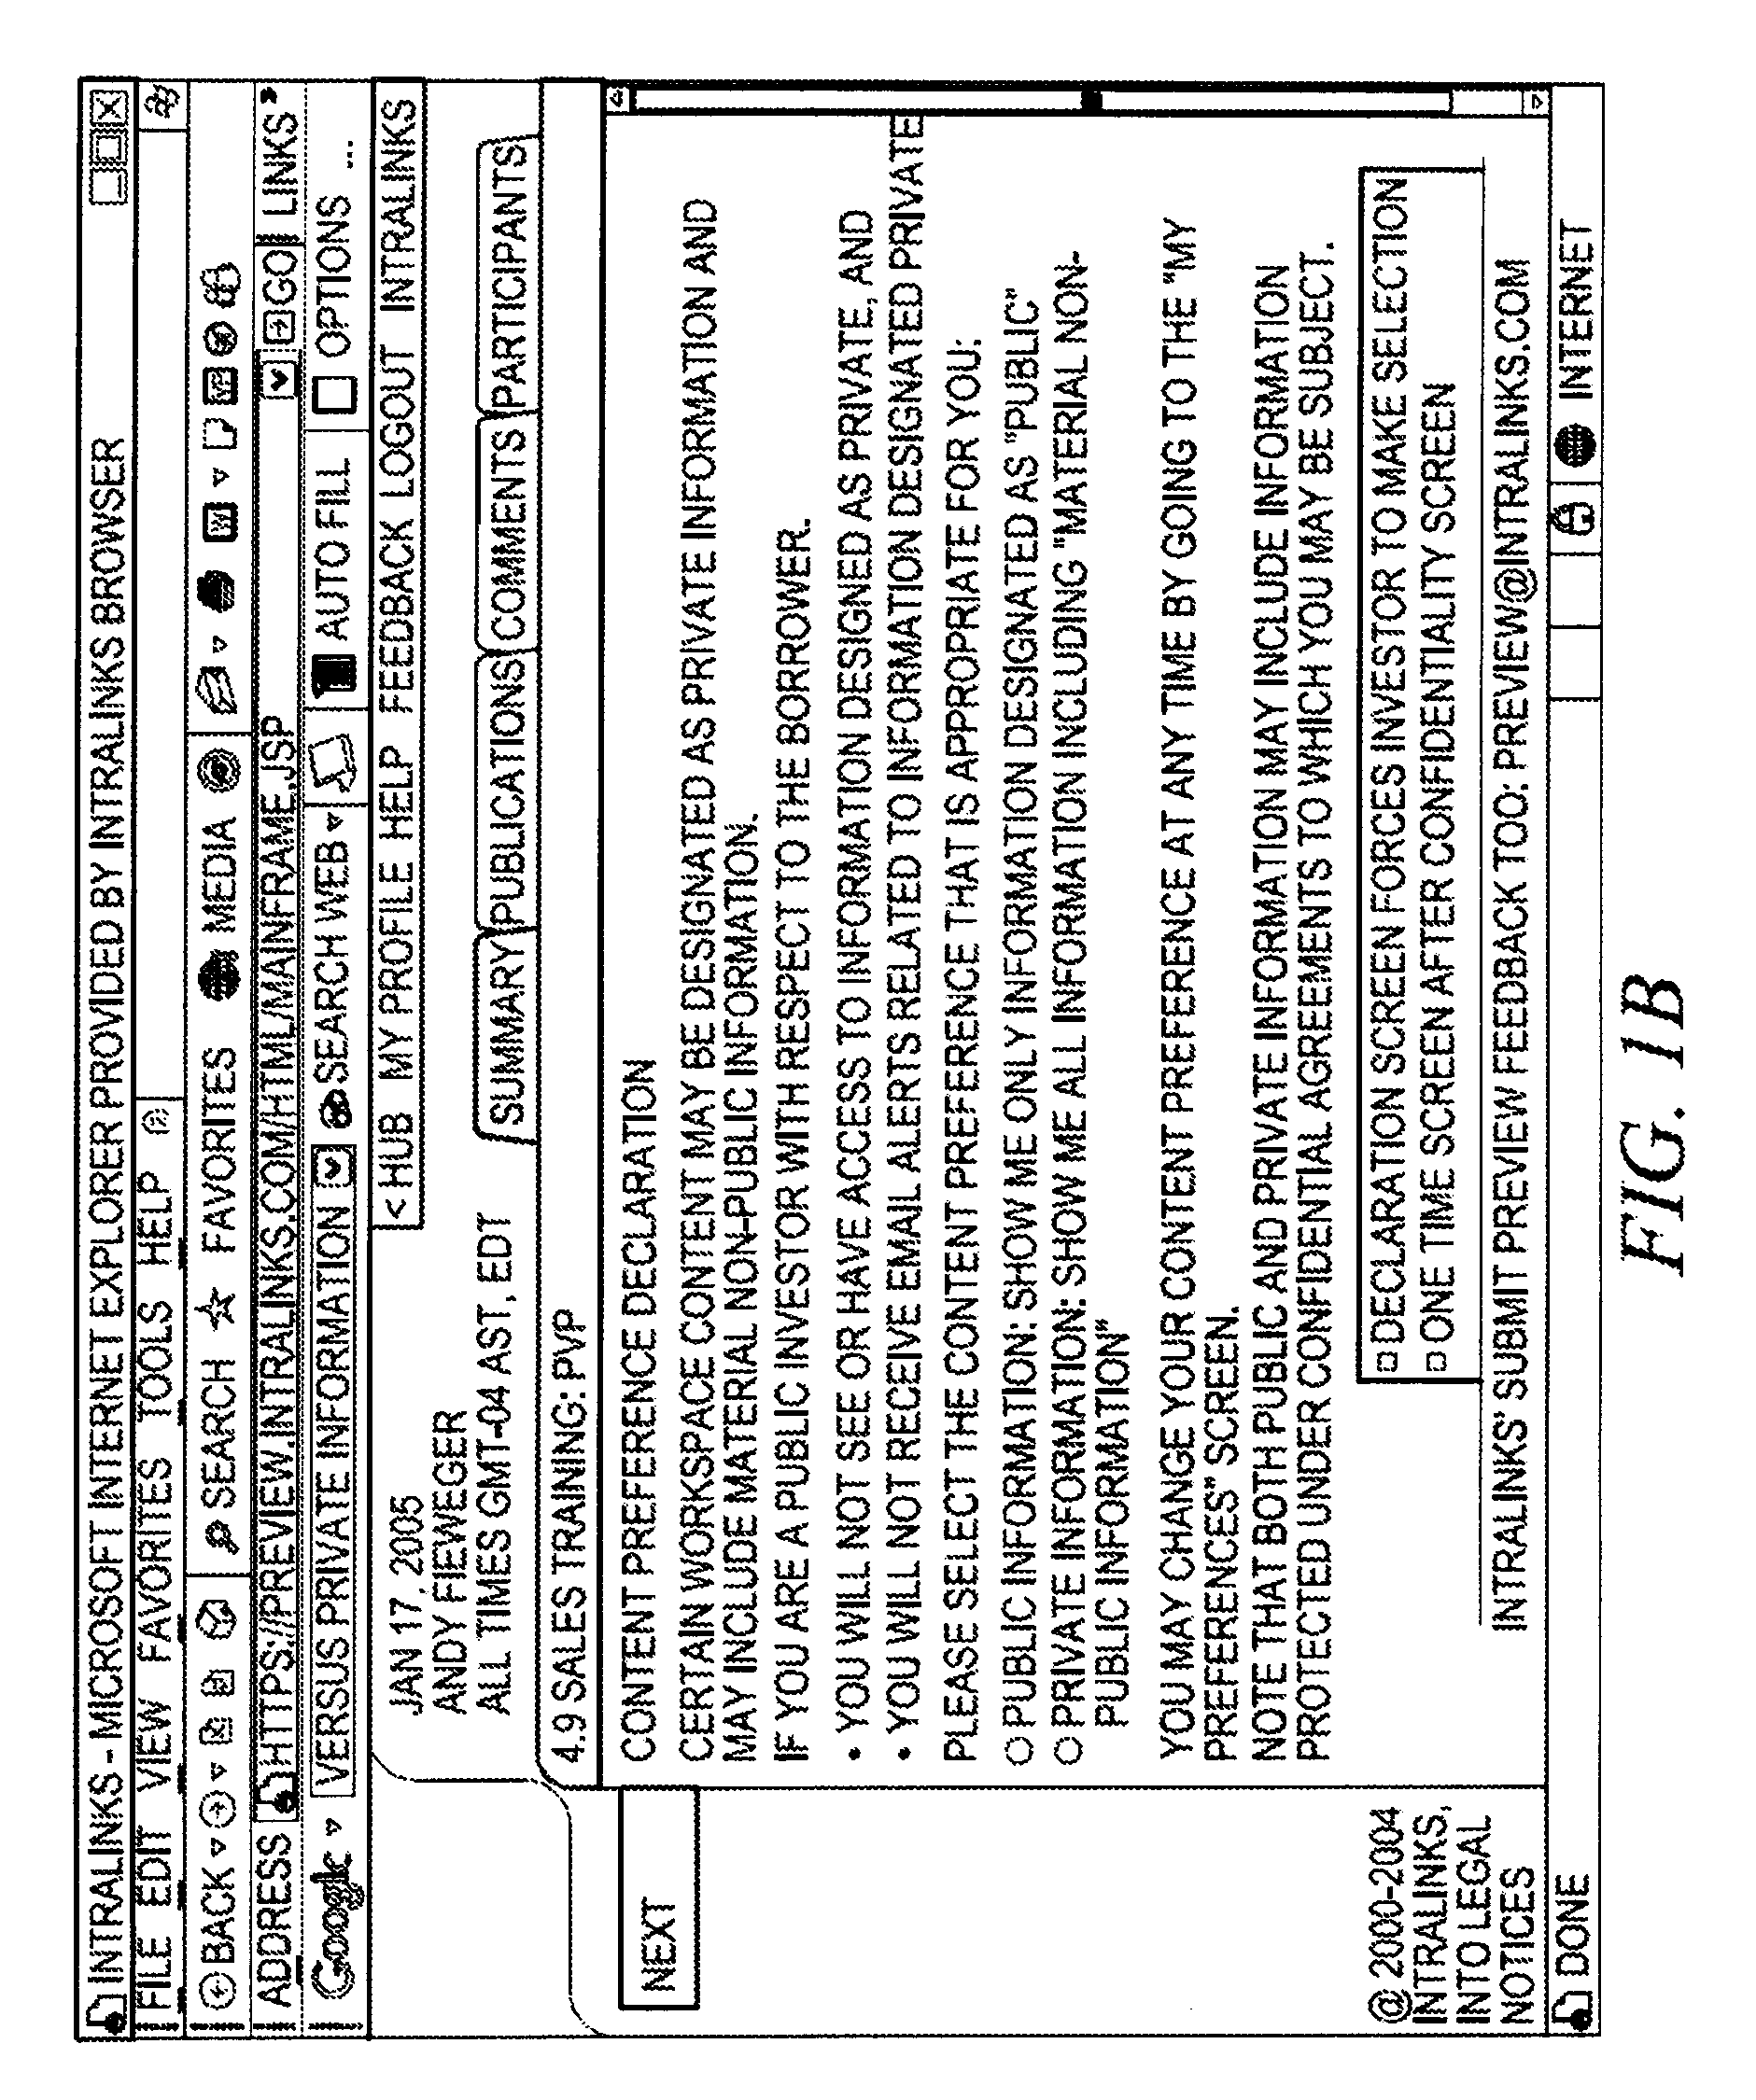 System and method for information delivery based on at least one self-declared user attribute